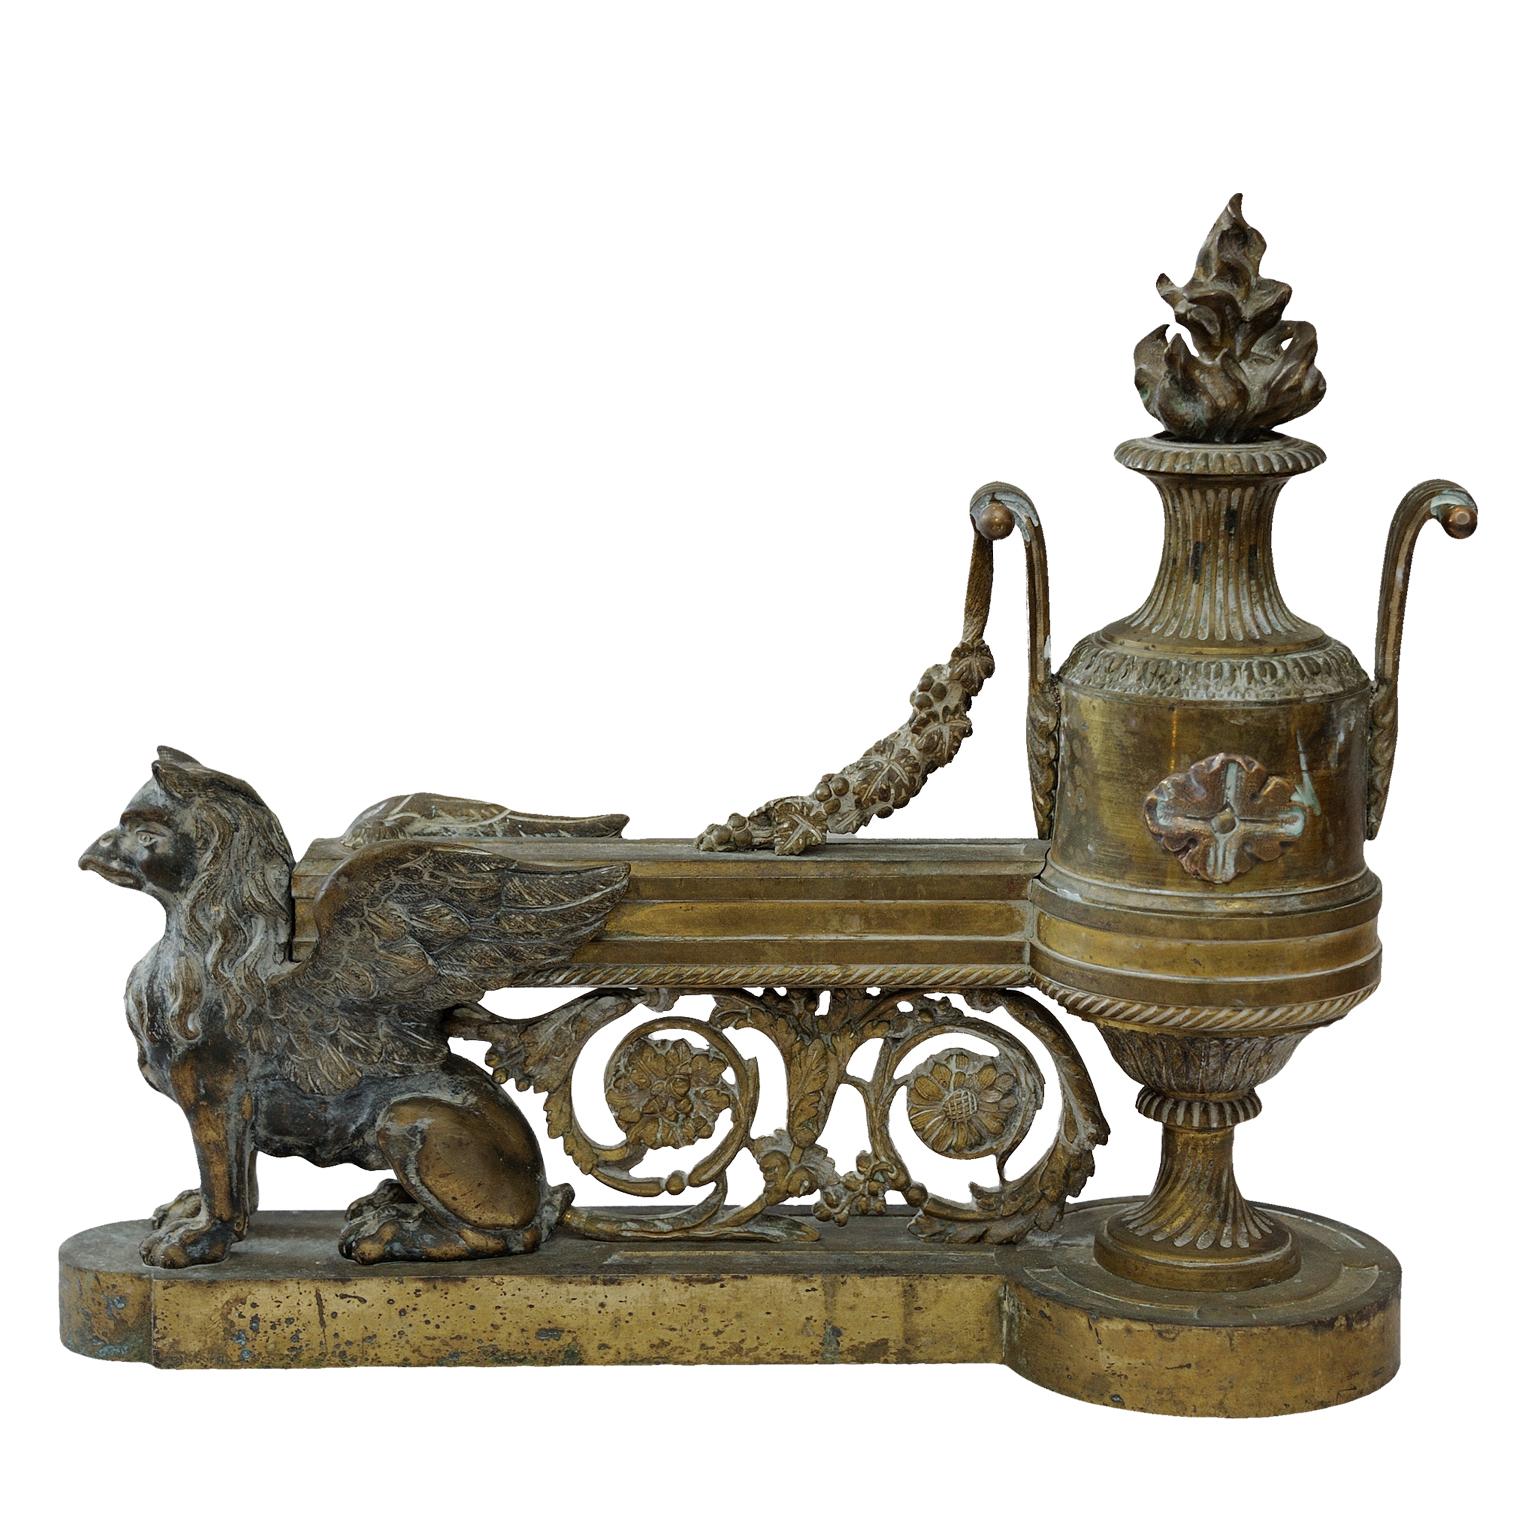 These are a mattractive pair of late 18th century French Louis XVI gilt brass fire dogs, decorated with griffins and flambeaux, circa 1795.
   